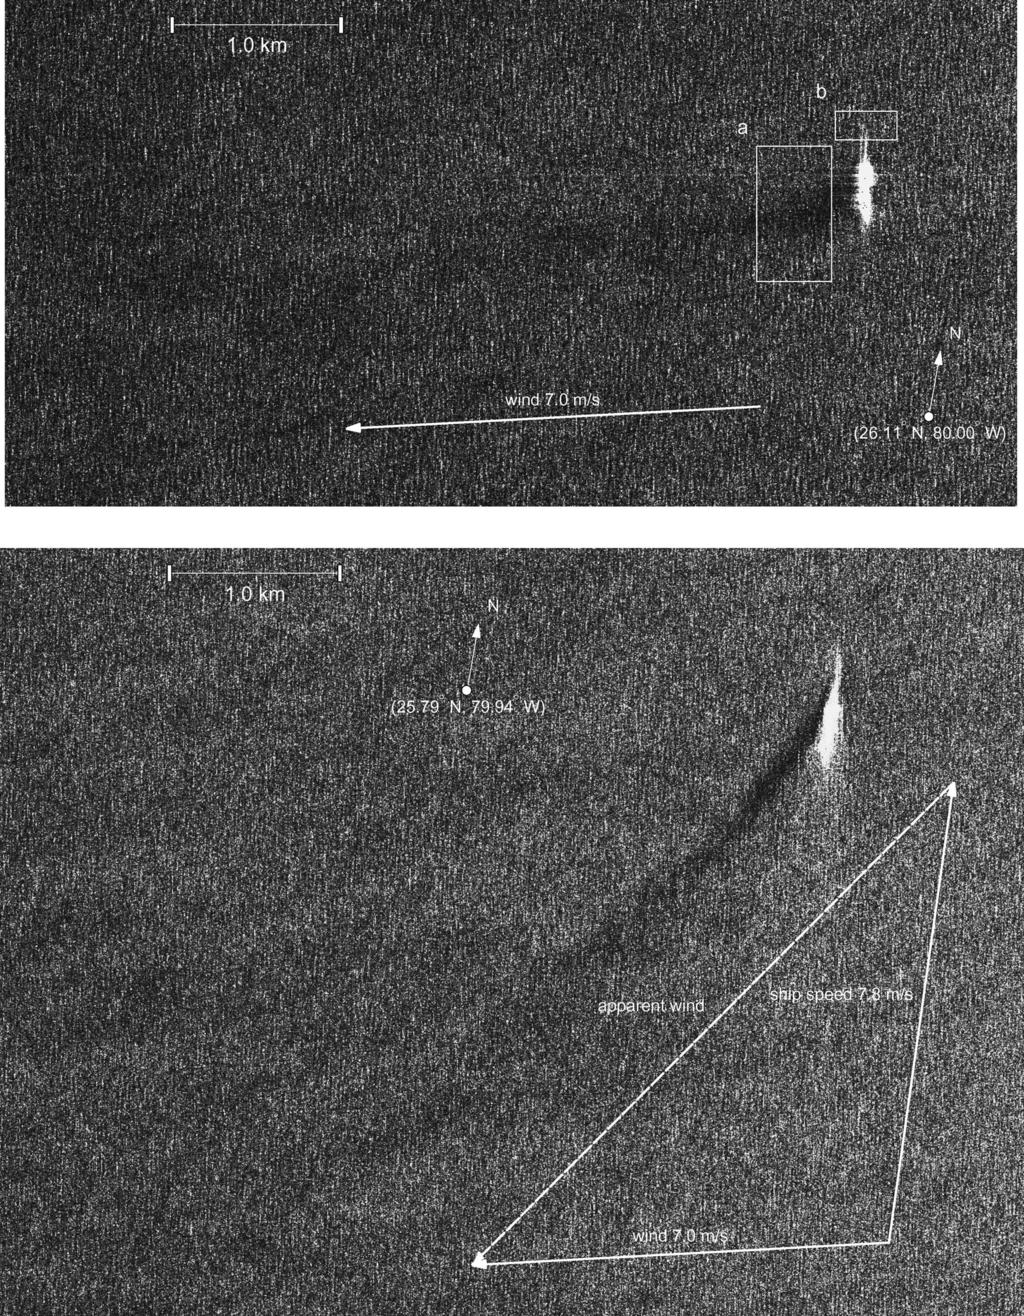 SOLOVIEV et al.: SONAR MEASUREMENTS IN SHIP WAKES 849 Fig. 9. Clips from the SAR image of the Miami and Port Everglades area made on June 25, 2008.